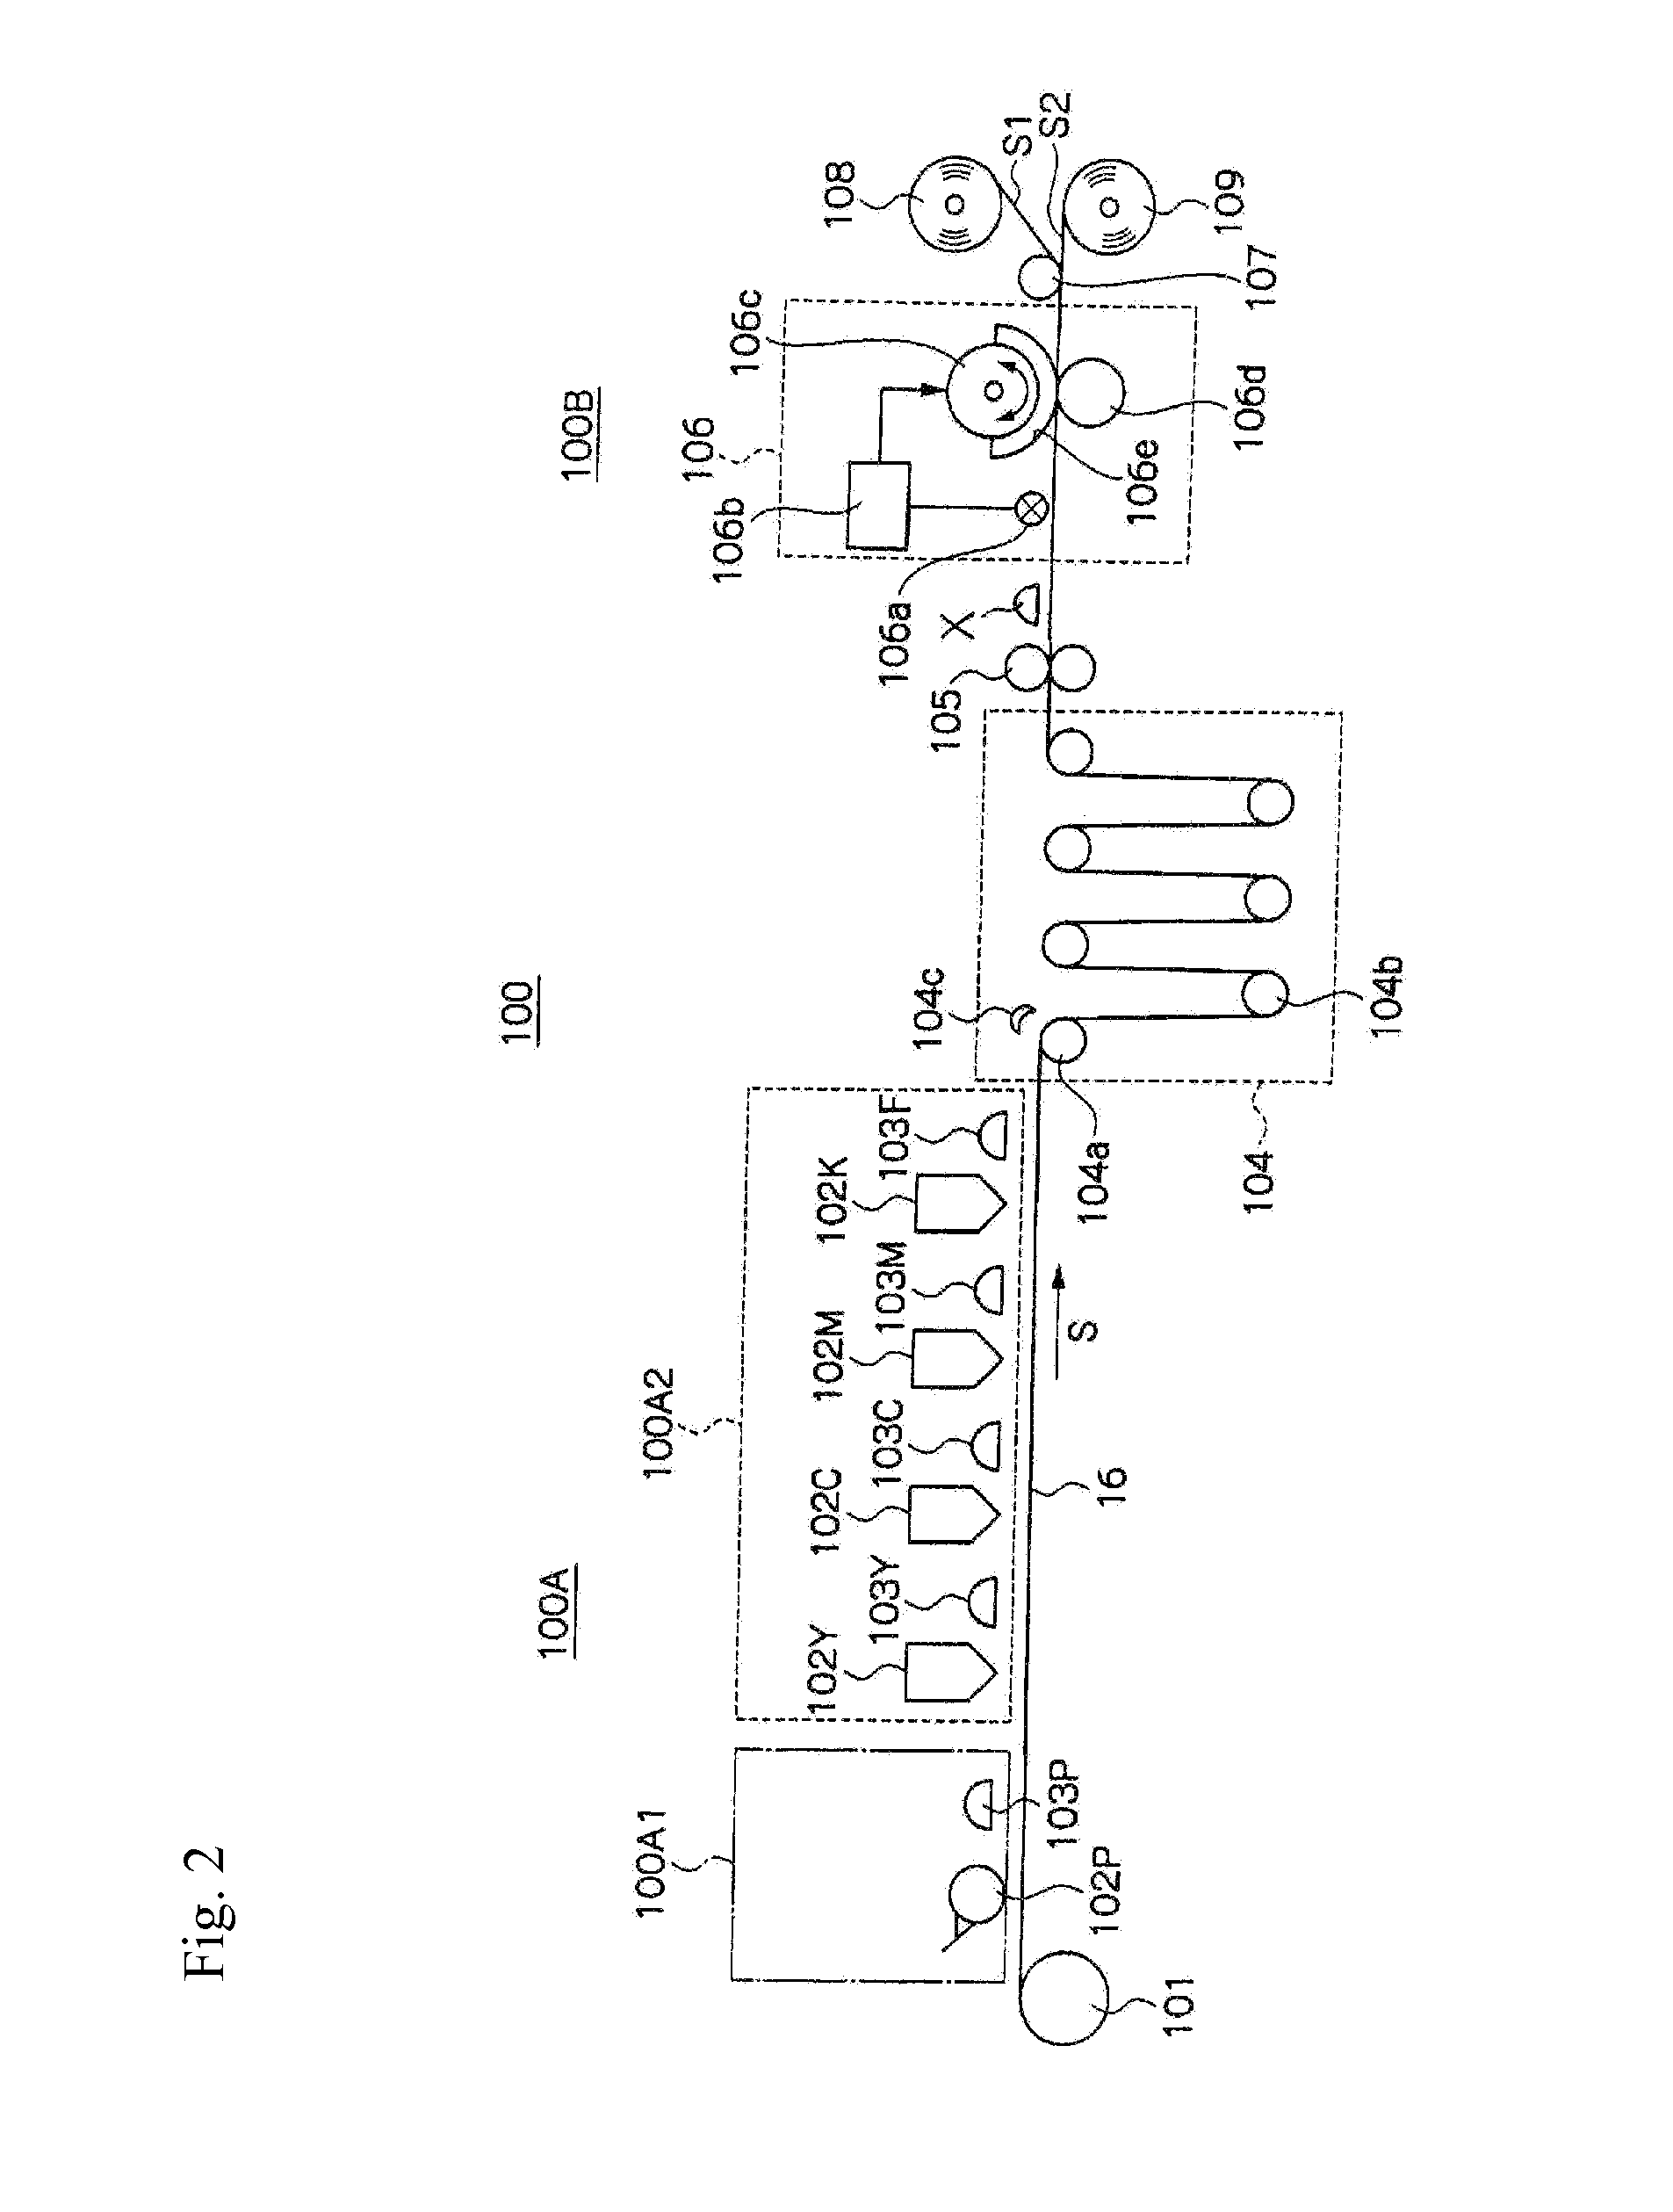 Ink jet recording method and ink jet recording device